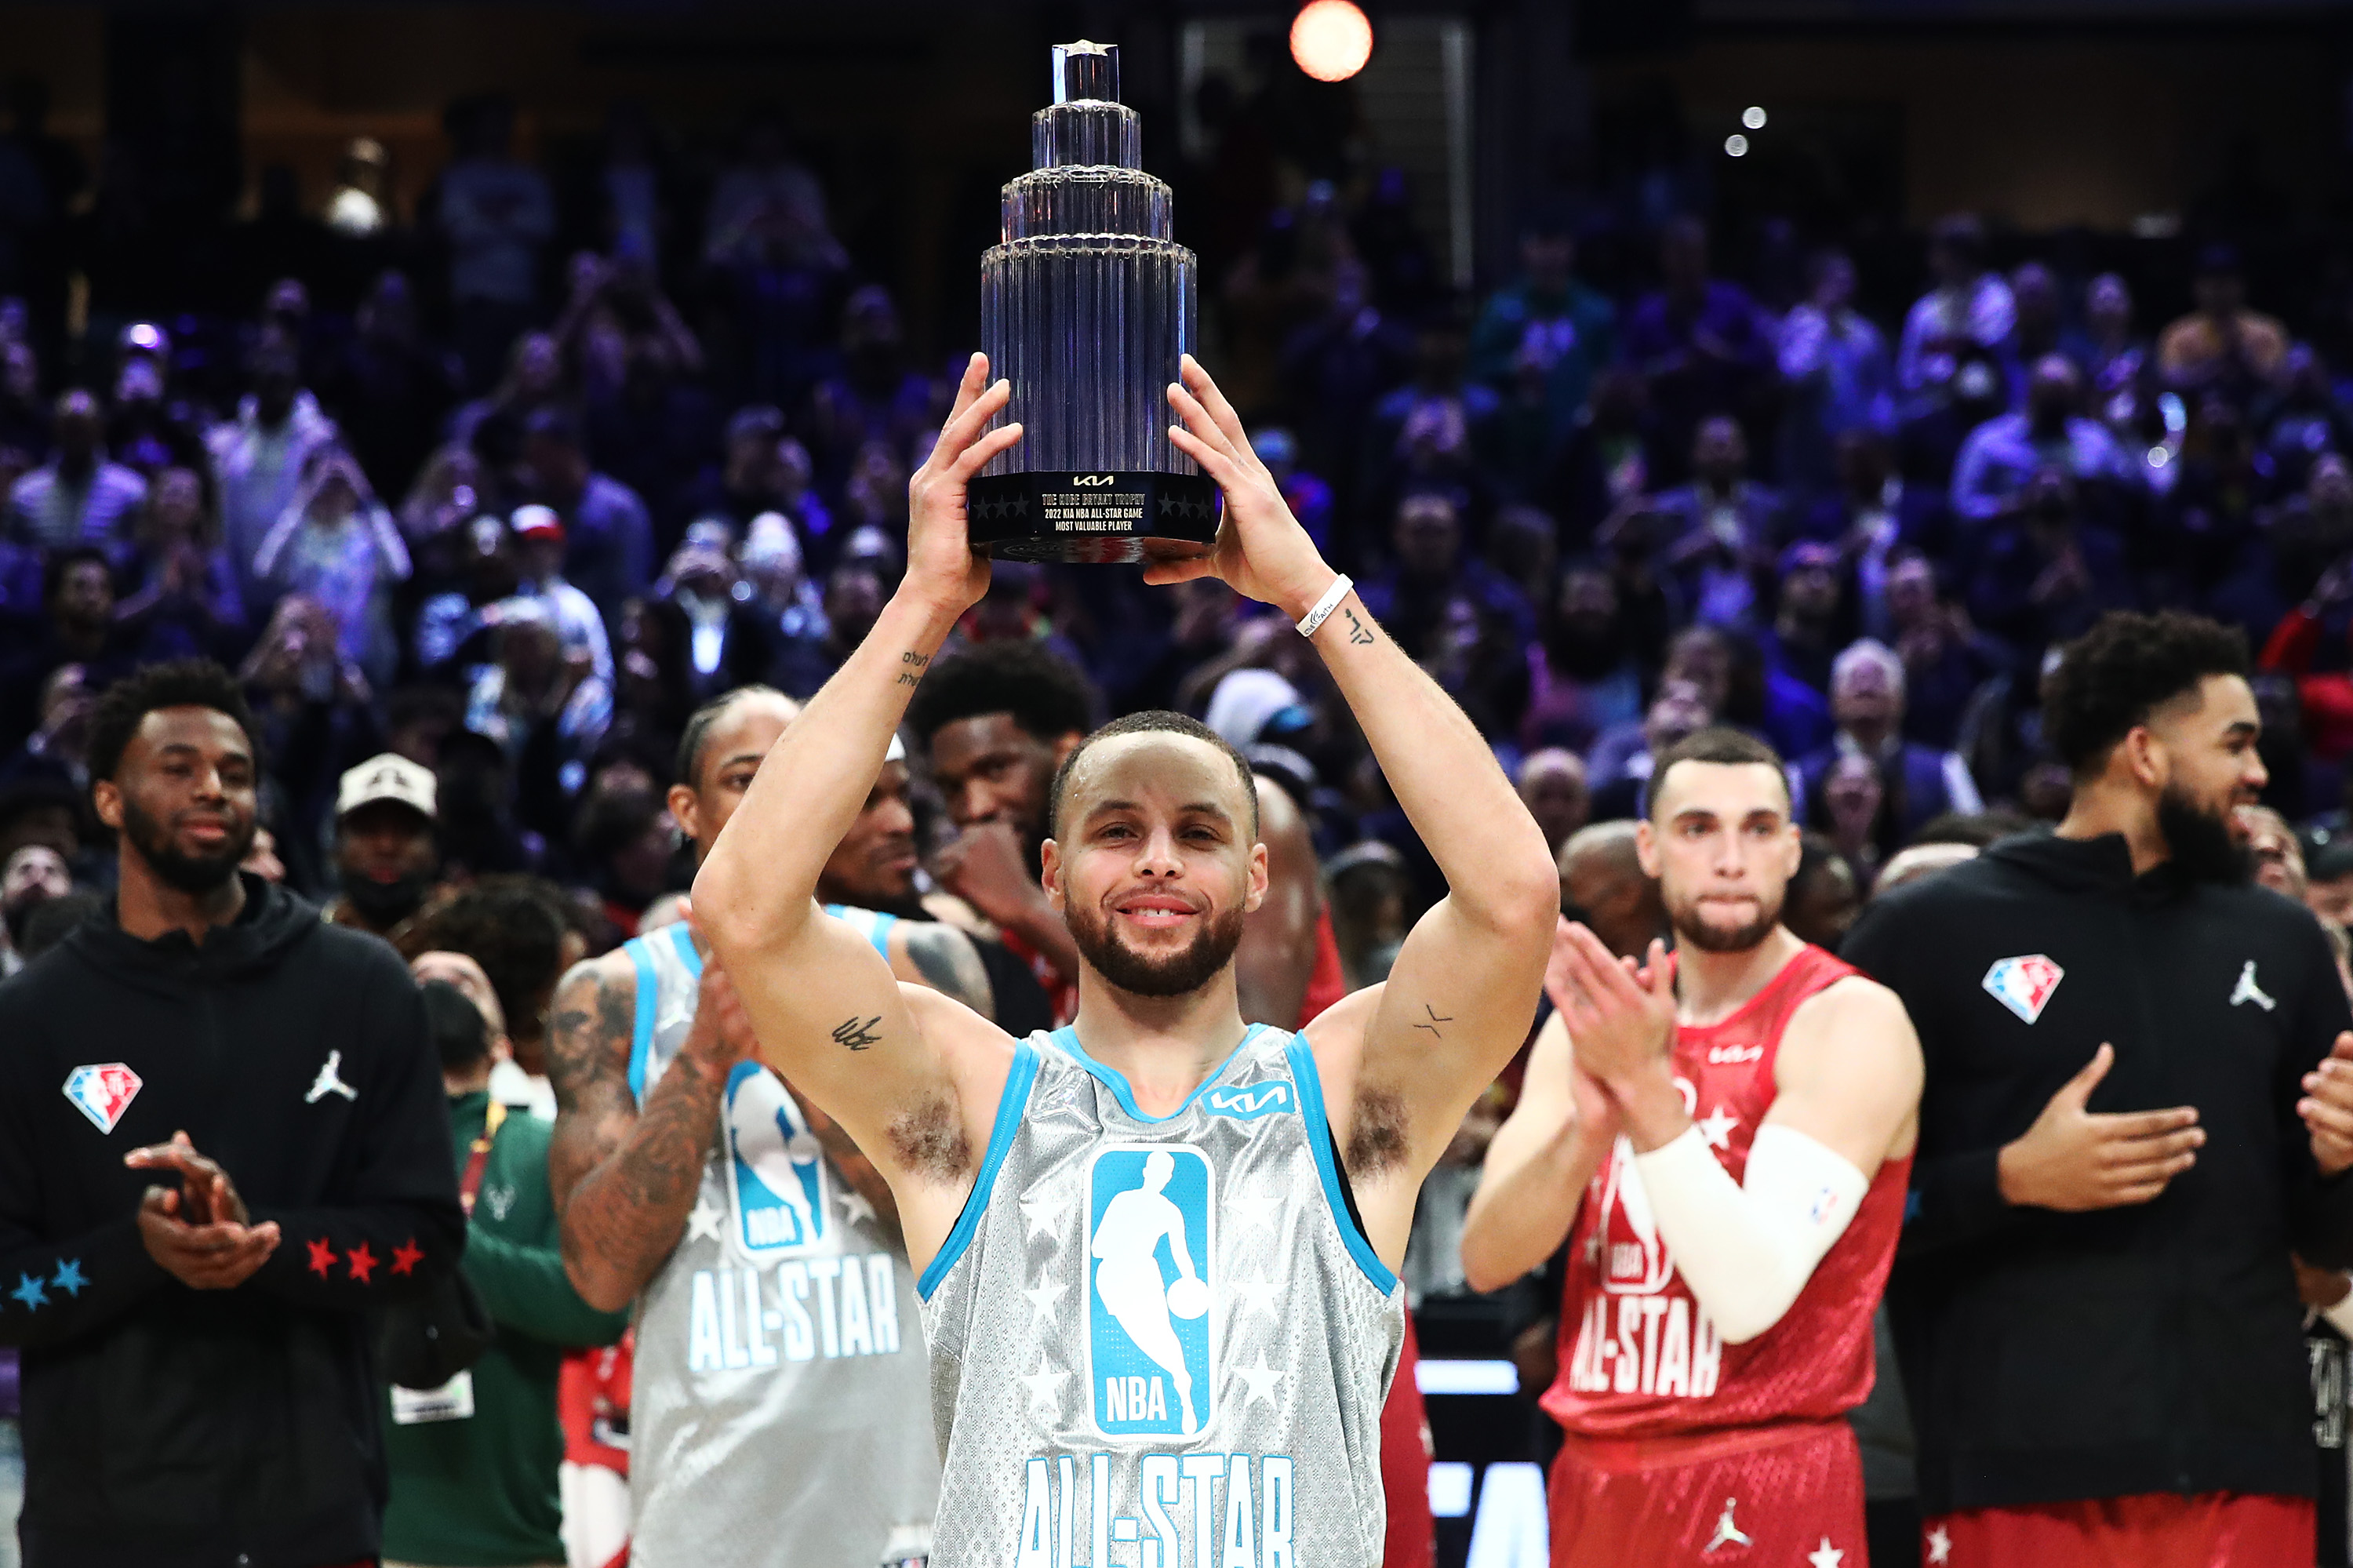 NBA All-Star Game 2022 results, highlights: Curry drops 50, LeBron James  dagger ices victory over Team Durant